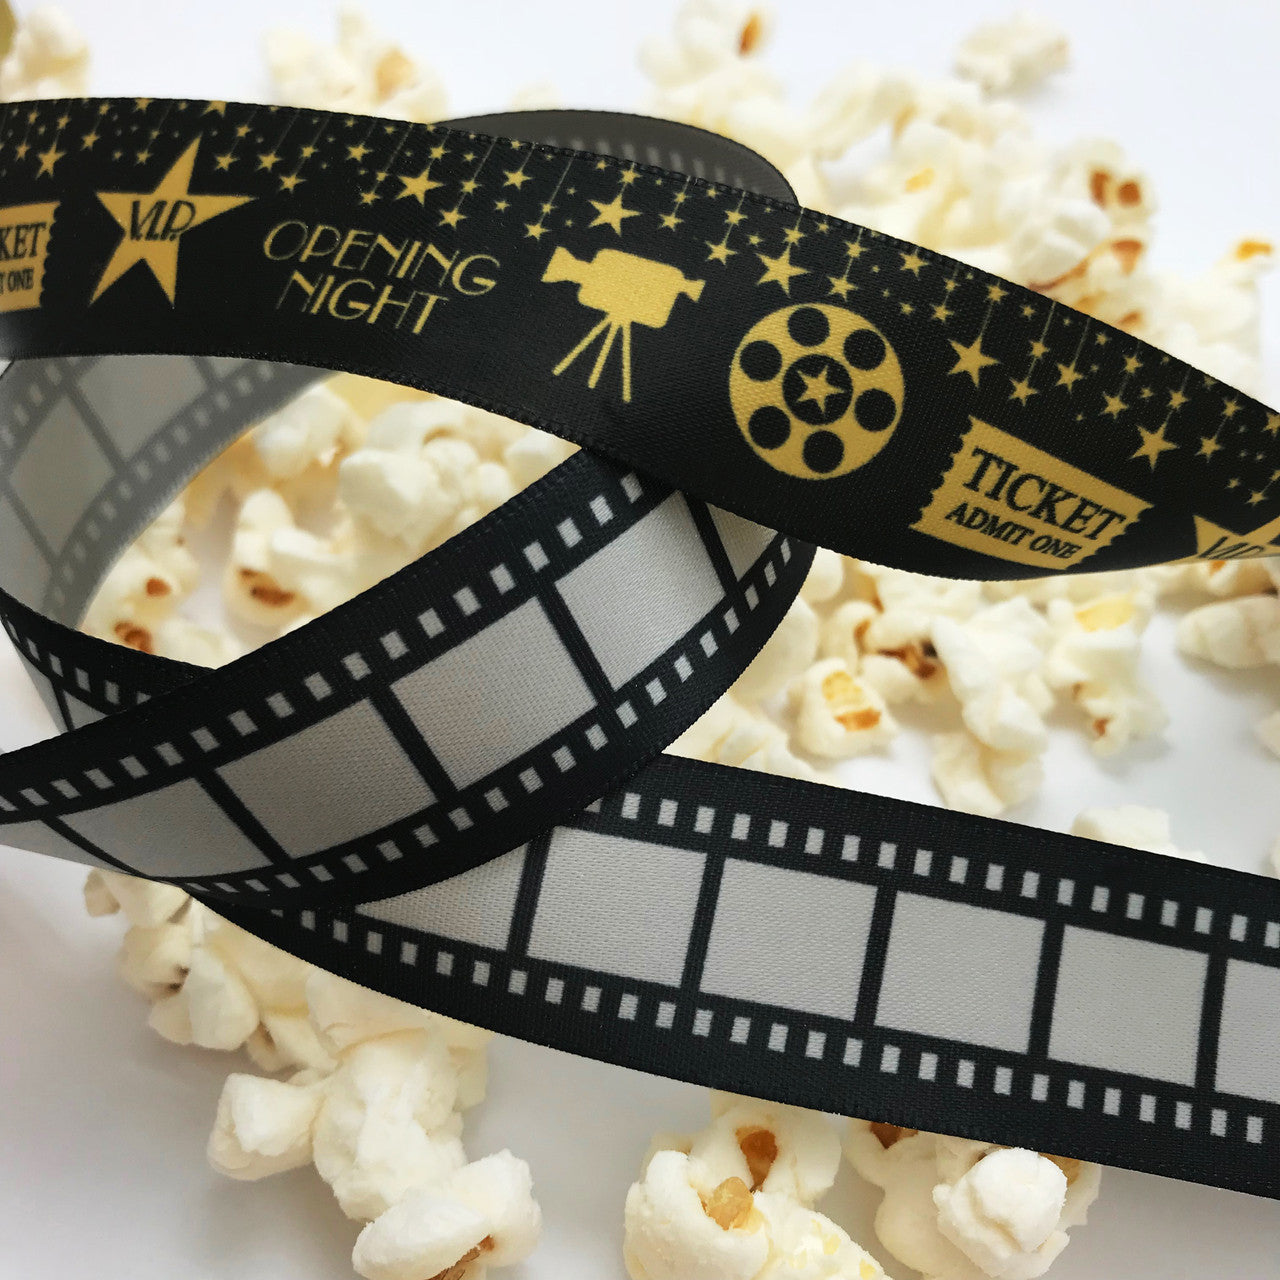 Pair our Movie Film strip ribbon with our Movie themed ribbon in gold and black for a very special Movie night or Oscar party!